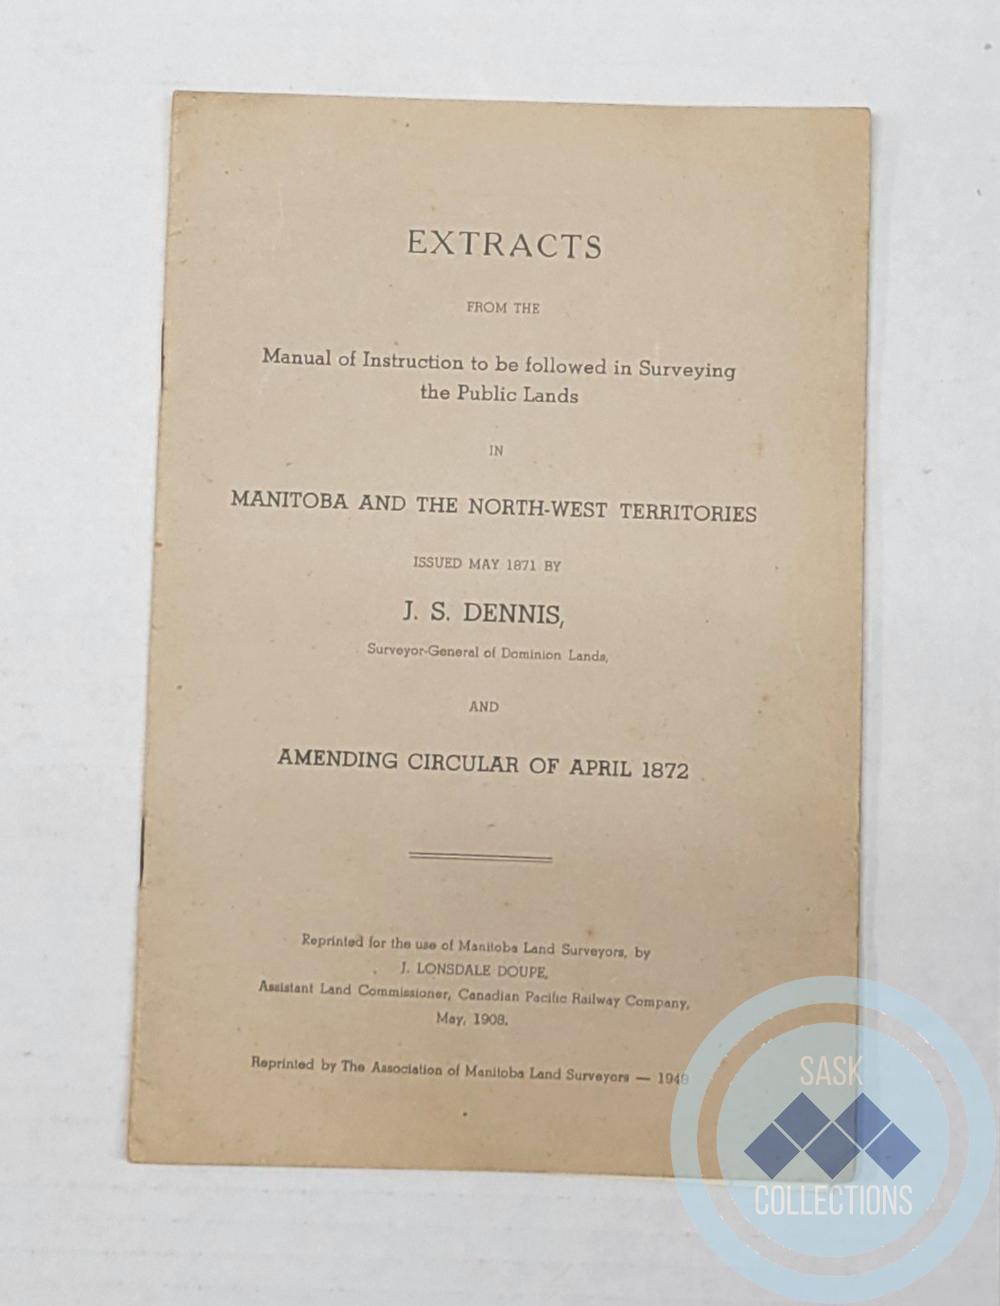 Extracts from the Manual of Instruction to be followed in Surveying the Public Lands in Manitoba and the North-West Territories